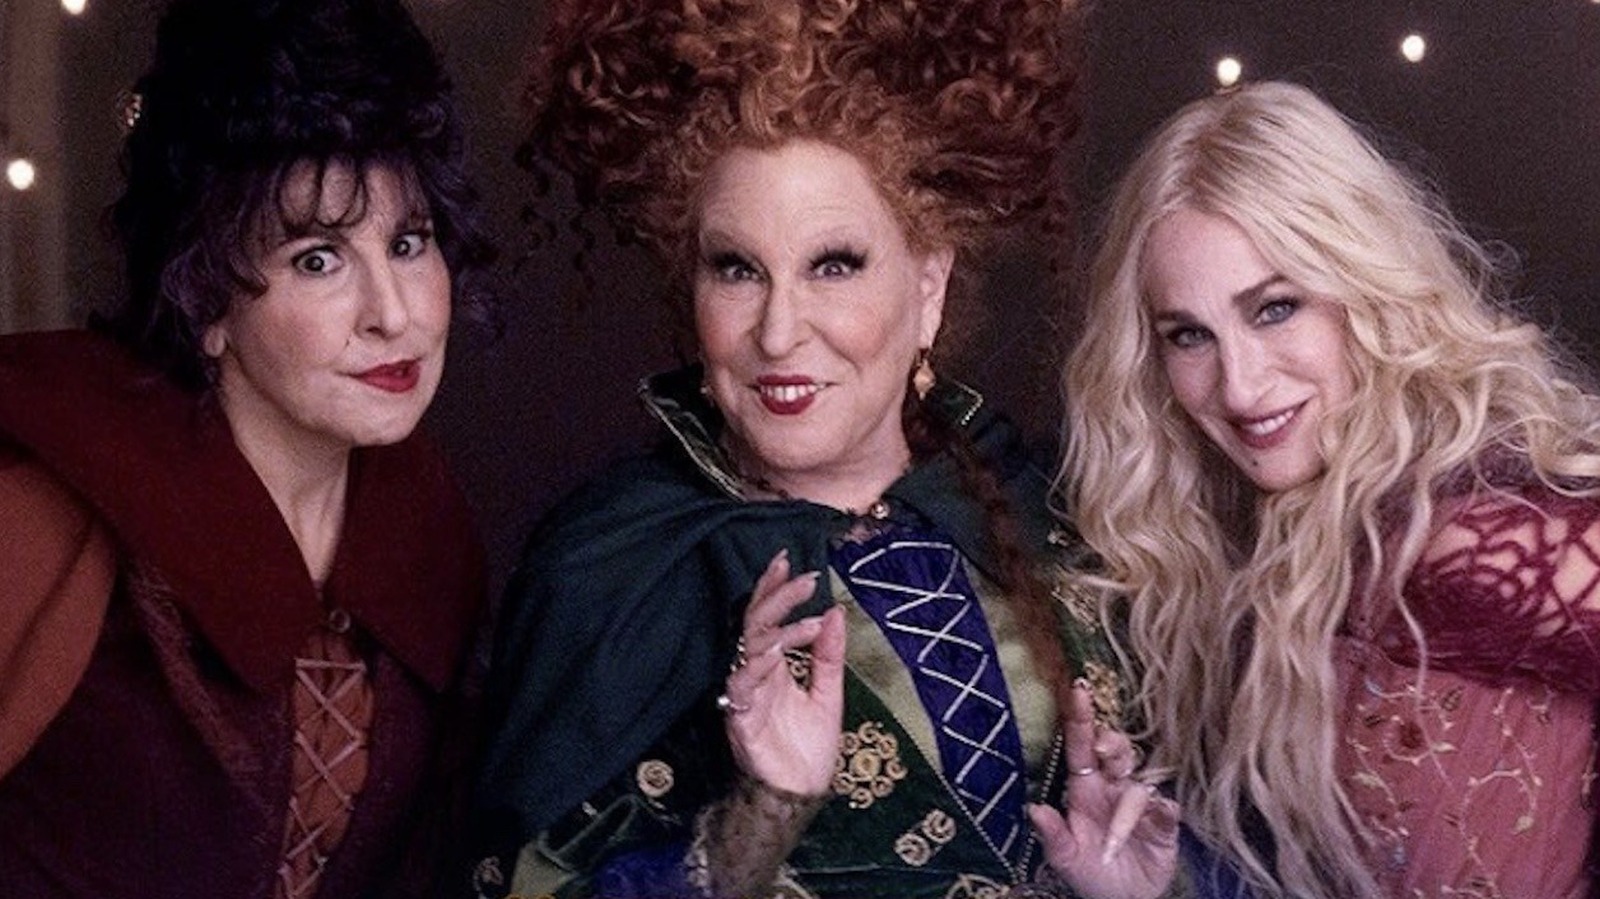 All The Tutorials You Need To Have The Perfect Hocus Pocus-Themed Makeup This Halloween